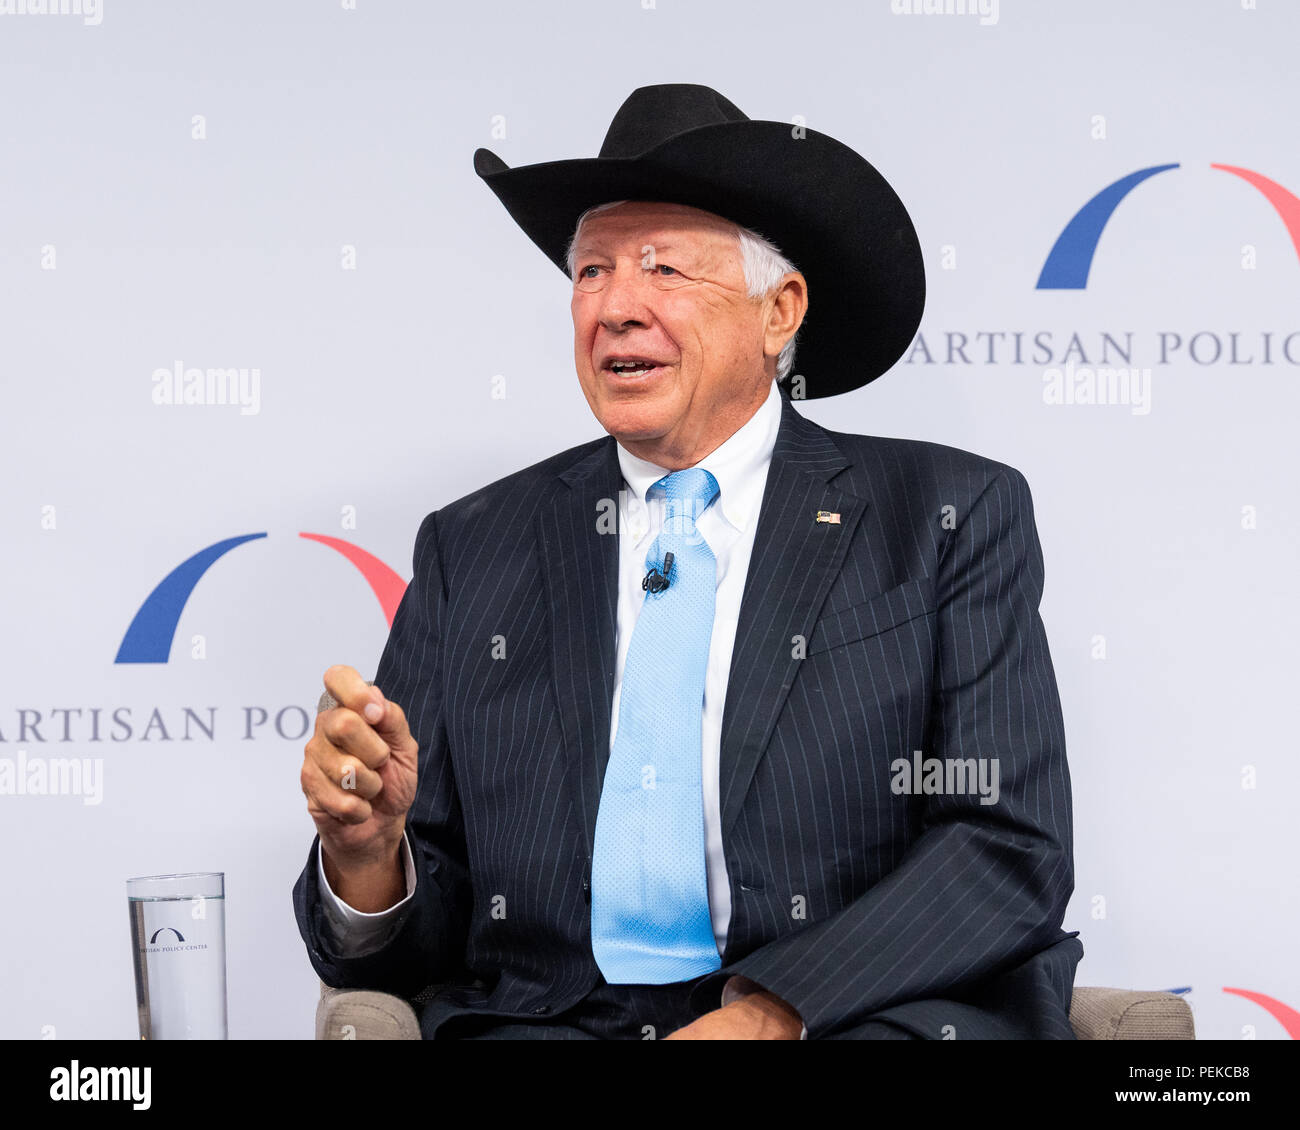 Foster Friess speaking at the Restoring Our Democracy program at the Bipartisan Policy Center in Washington, DC on April 17, 2018 Stock Photo